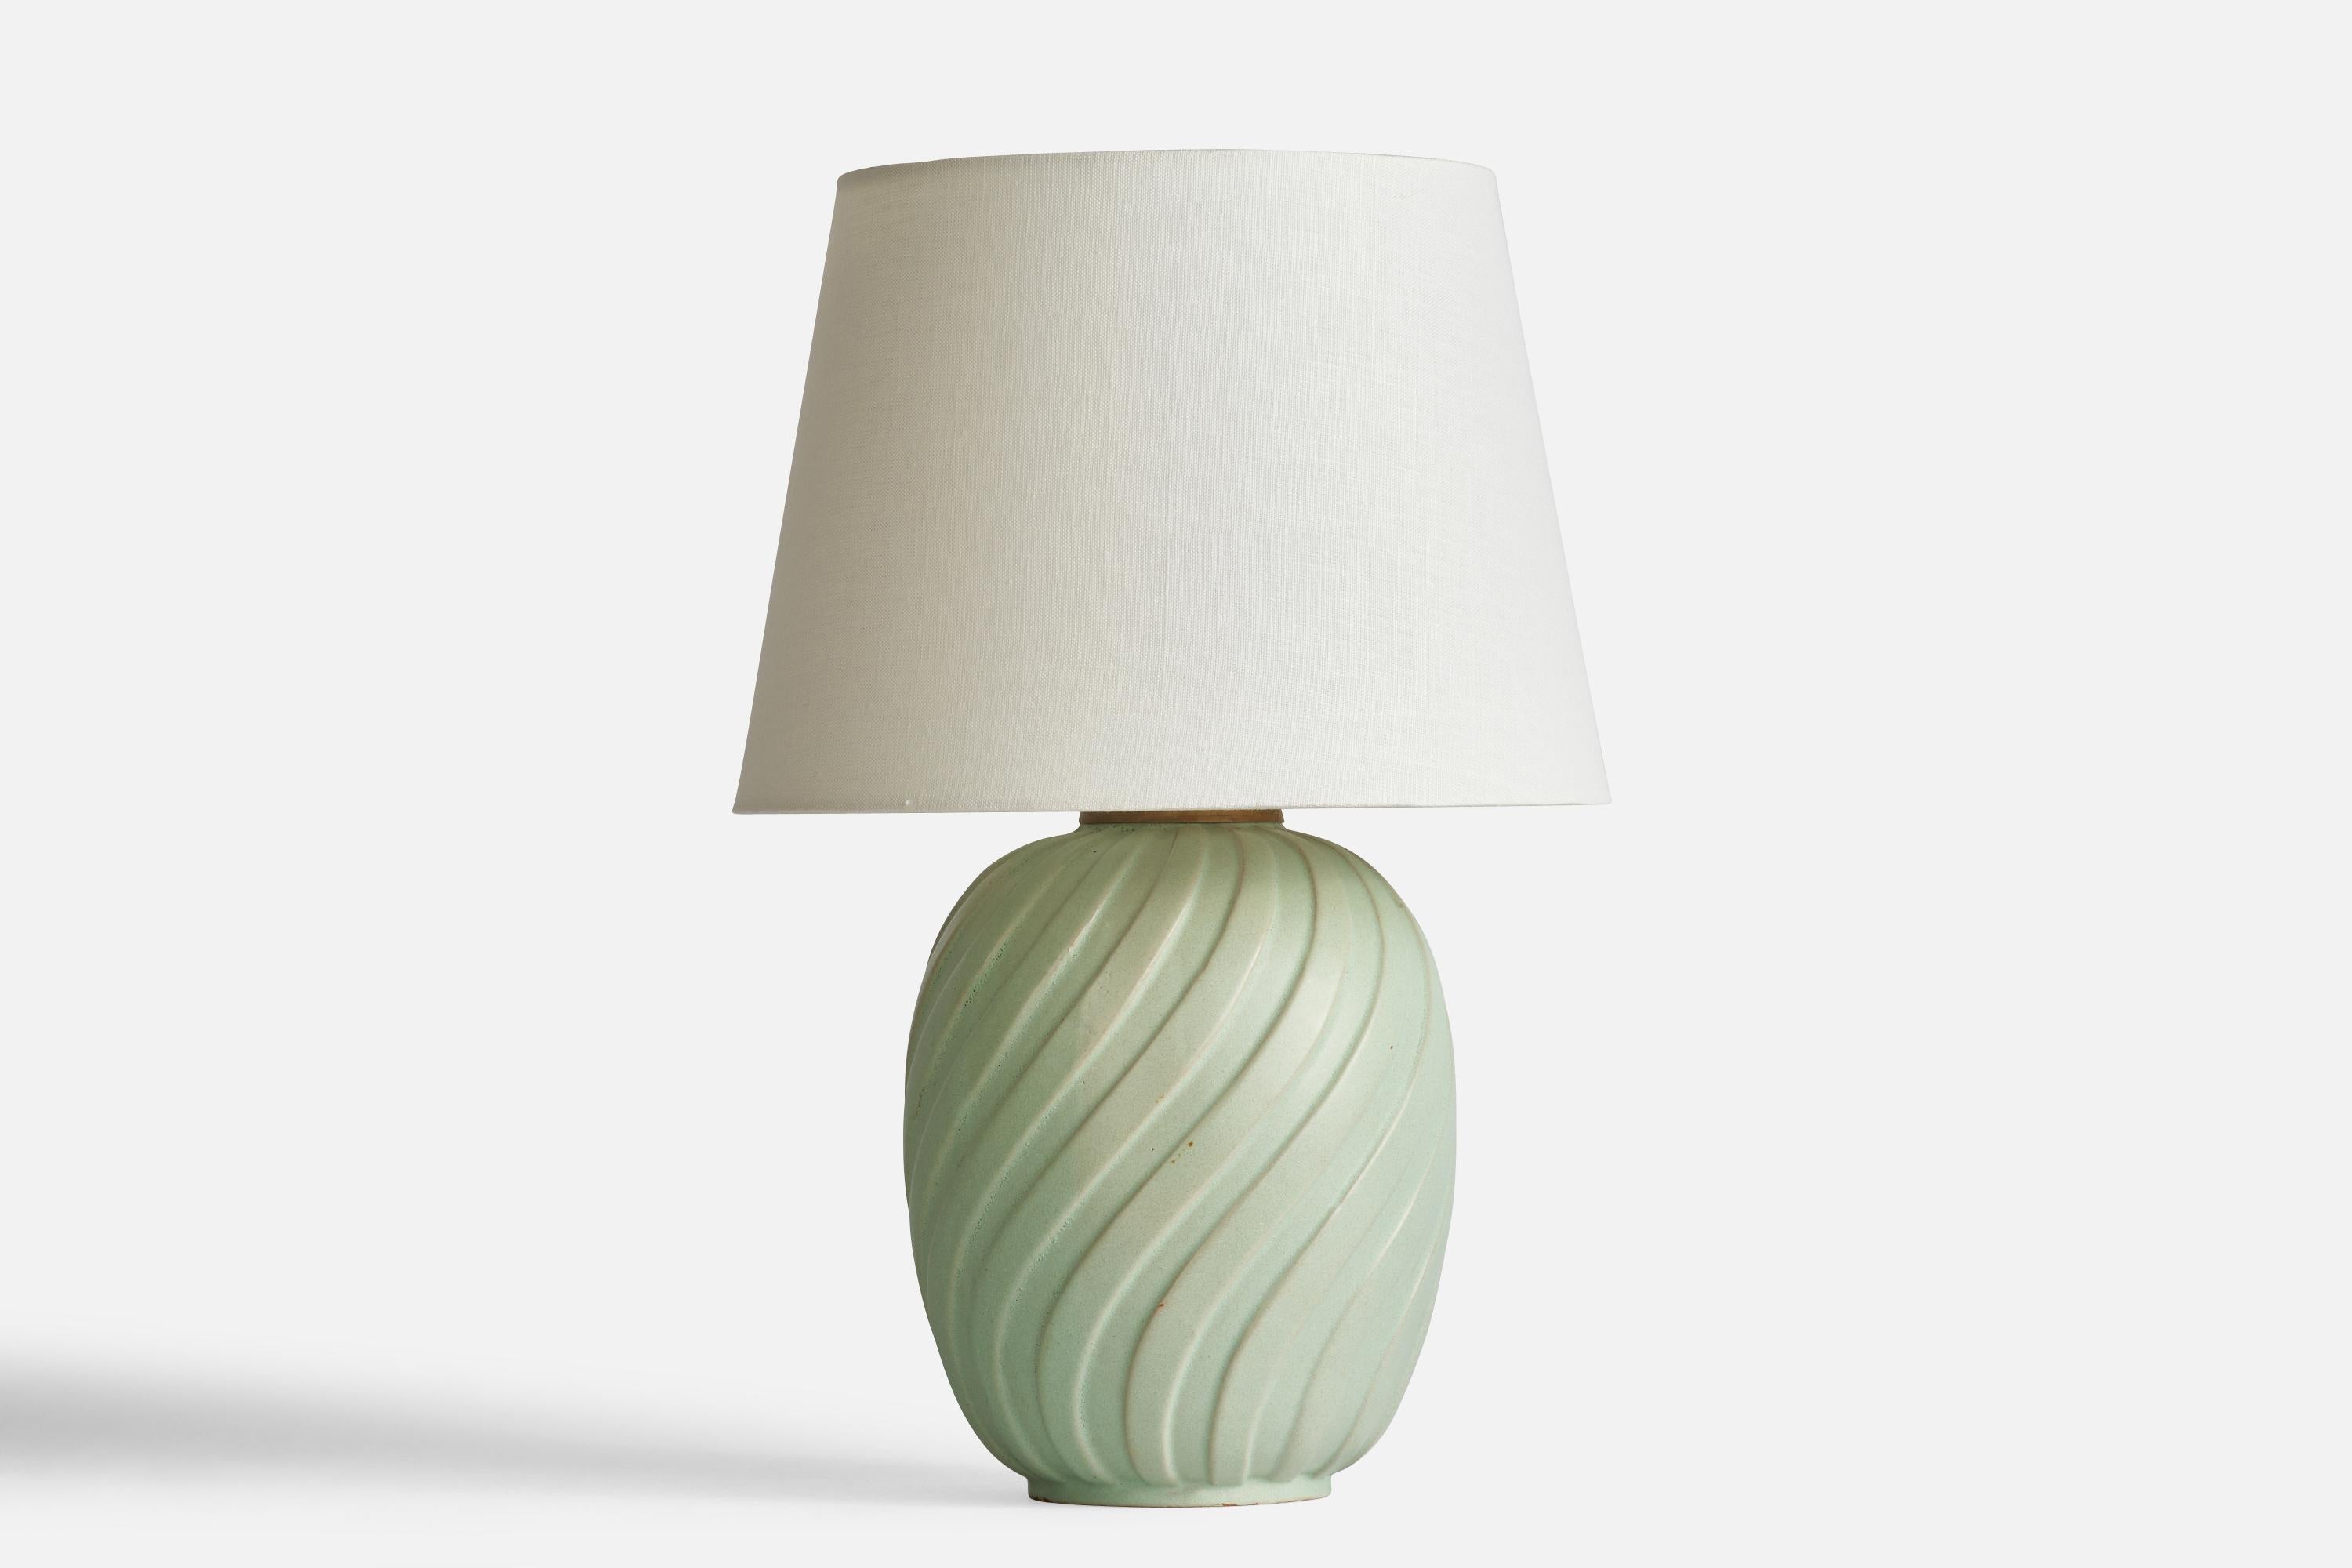 A celadon-green earthenware and brass table lamp designed and produced in Sweden, 1940s.

Dimensions of Lamp (inches): 12.5” H x 7.5” Diameter
Dimensions of Shade (inches): 9” Top Diameter x 12” Bottom Diameter x 9” H
Dimensions of Lamp with Shade